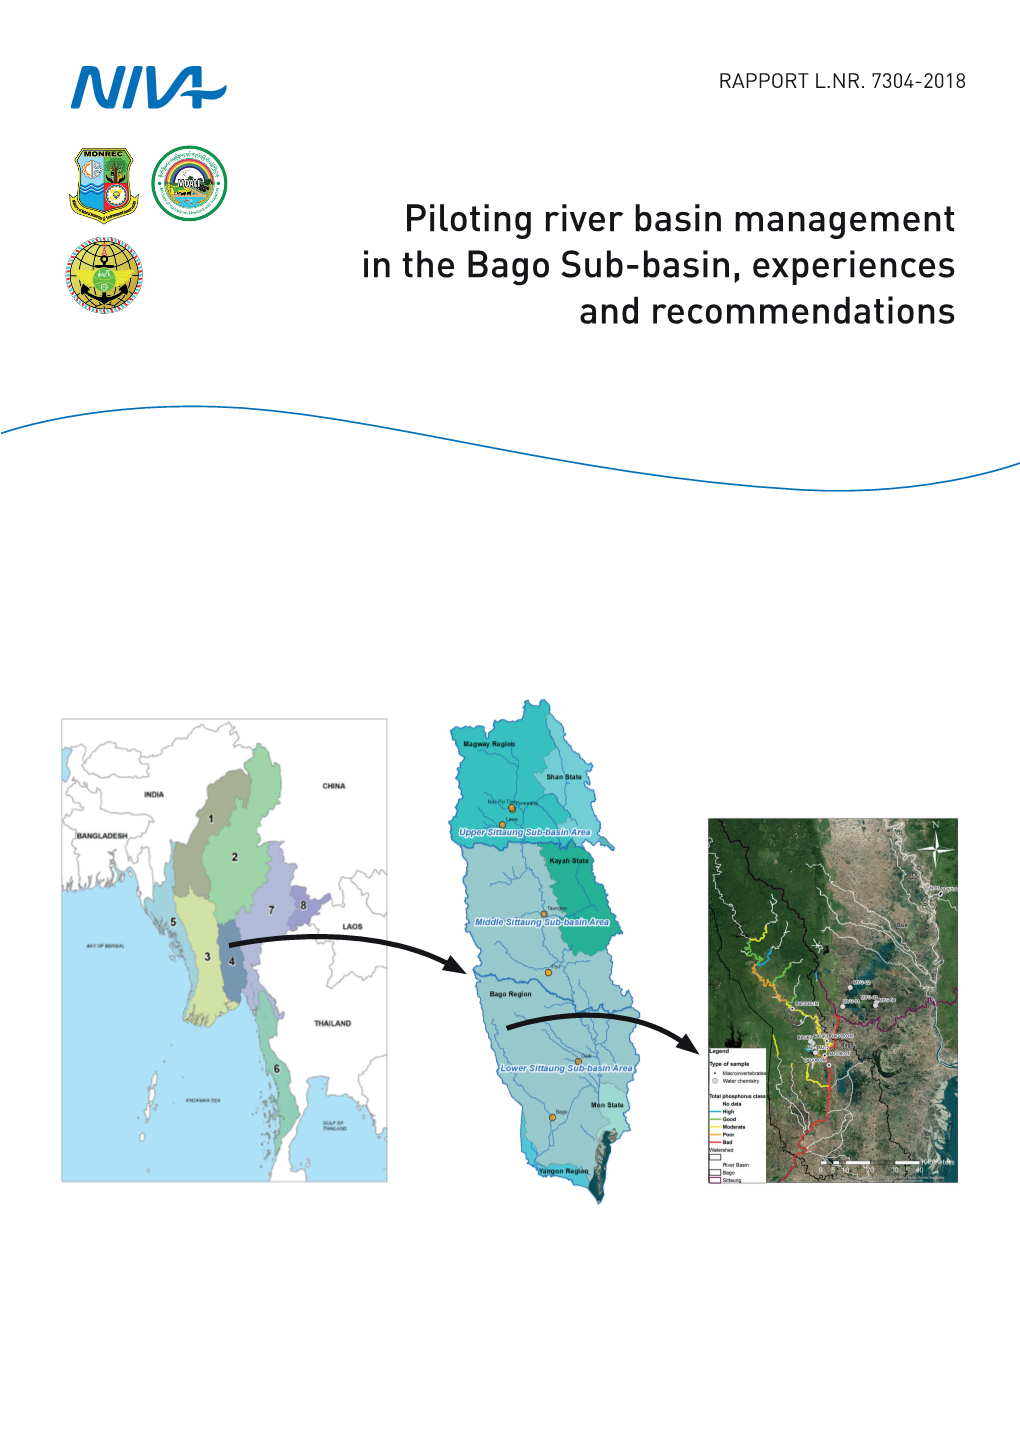 Piloting River Basin Management in the Bago Sub-Basin, Experiences And